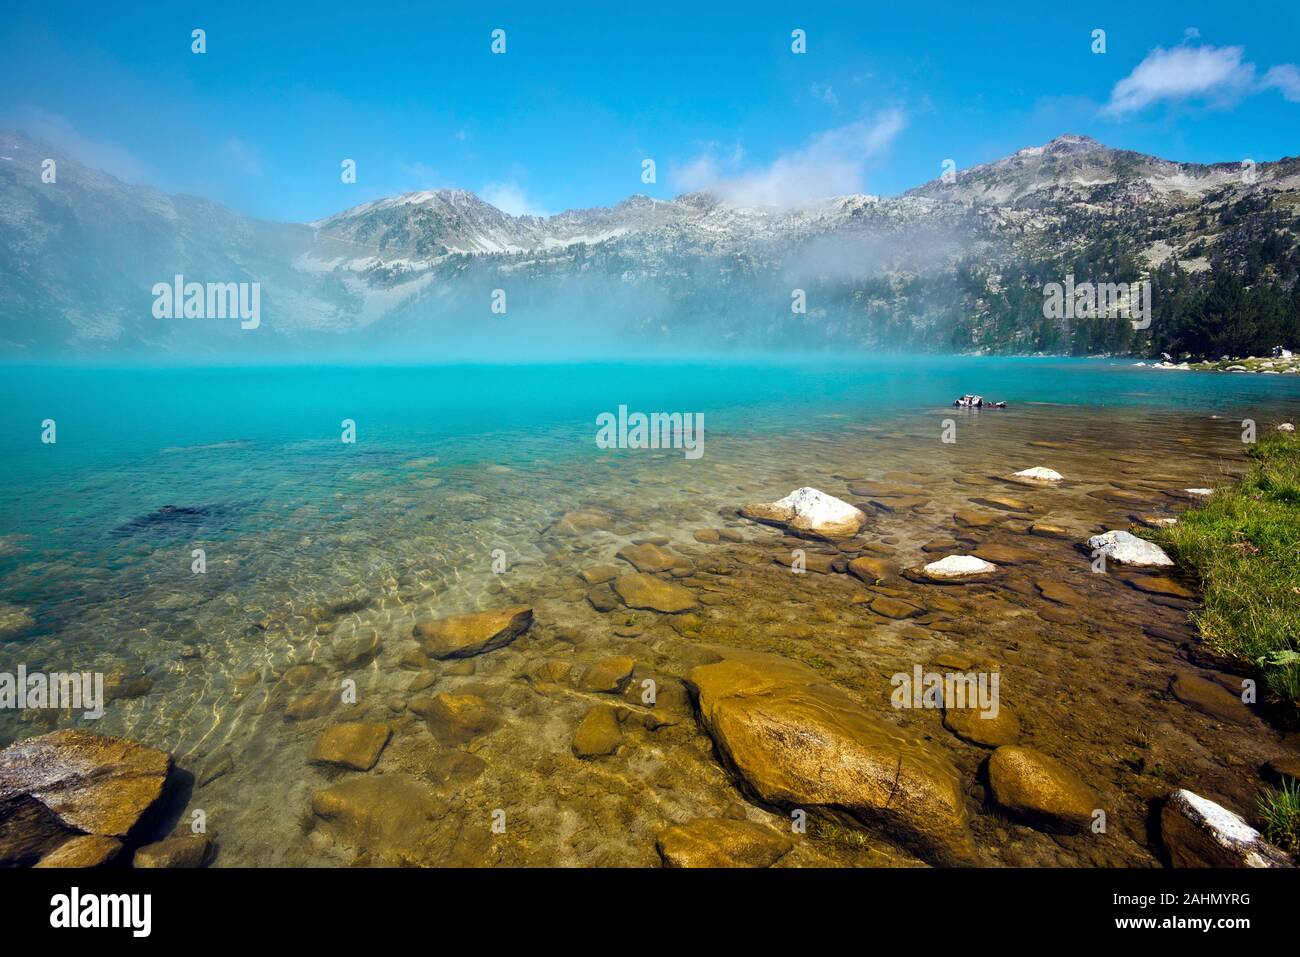 Mystery colors of Aubert lake in Neouvielle Natural reserve, Transparent water at foreground, the mist at lake surface gives extraordinary cyan nuance Stock Photo